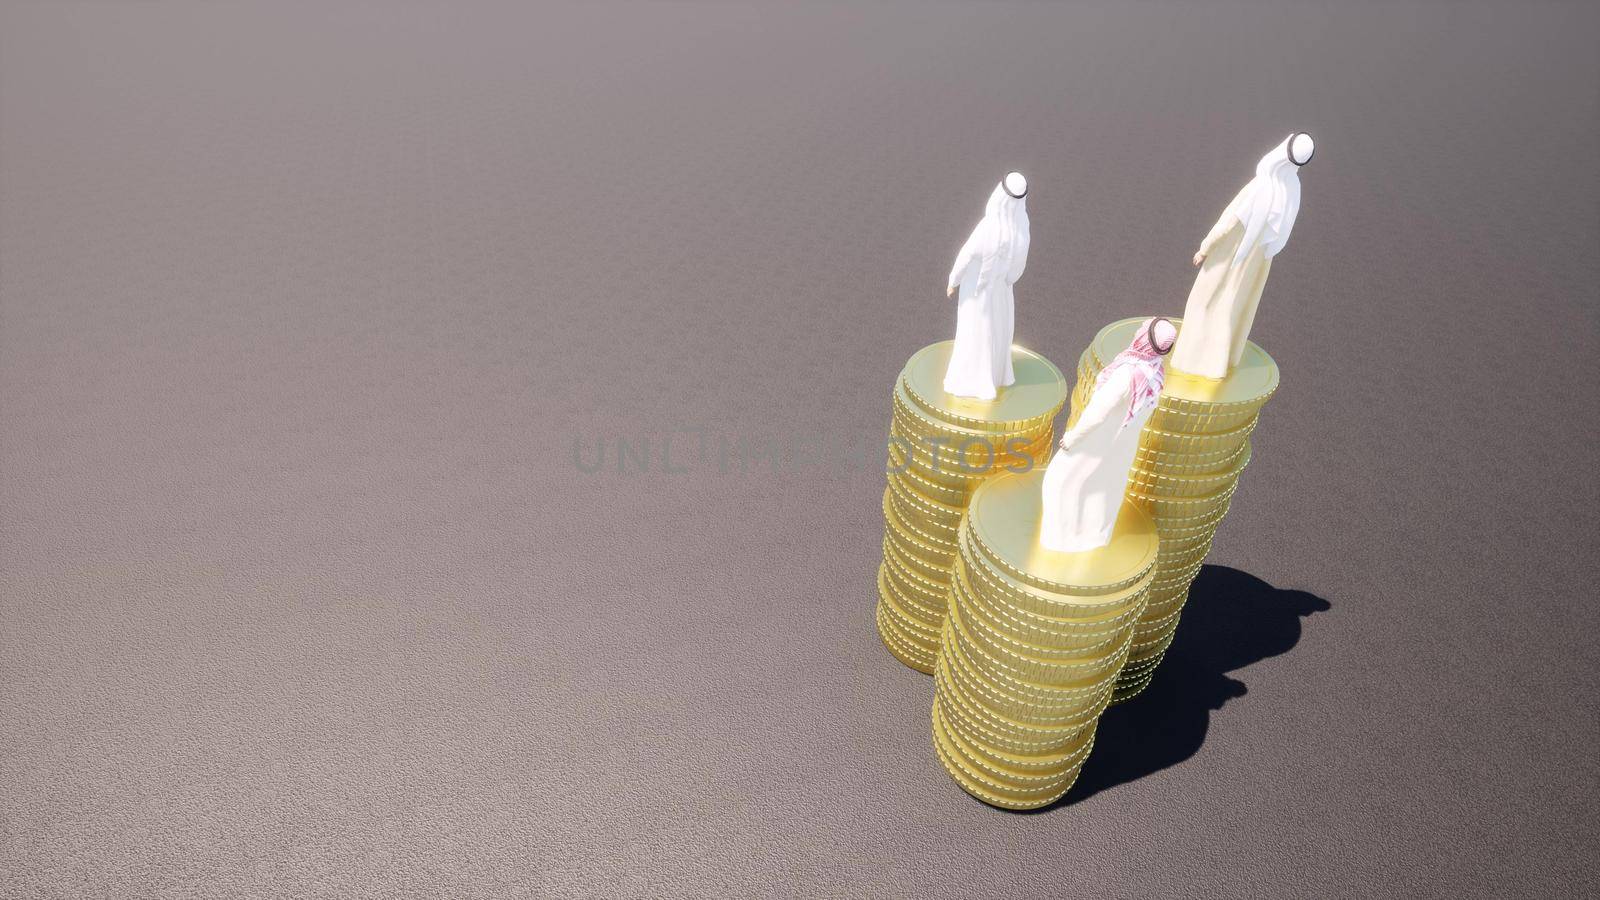 Arabic arabs stand on gold coins currency money 3d render by Zozulinskyi